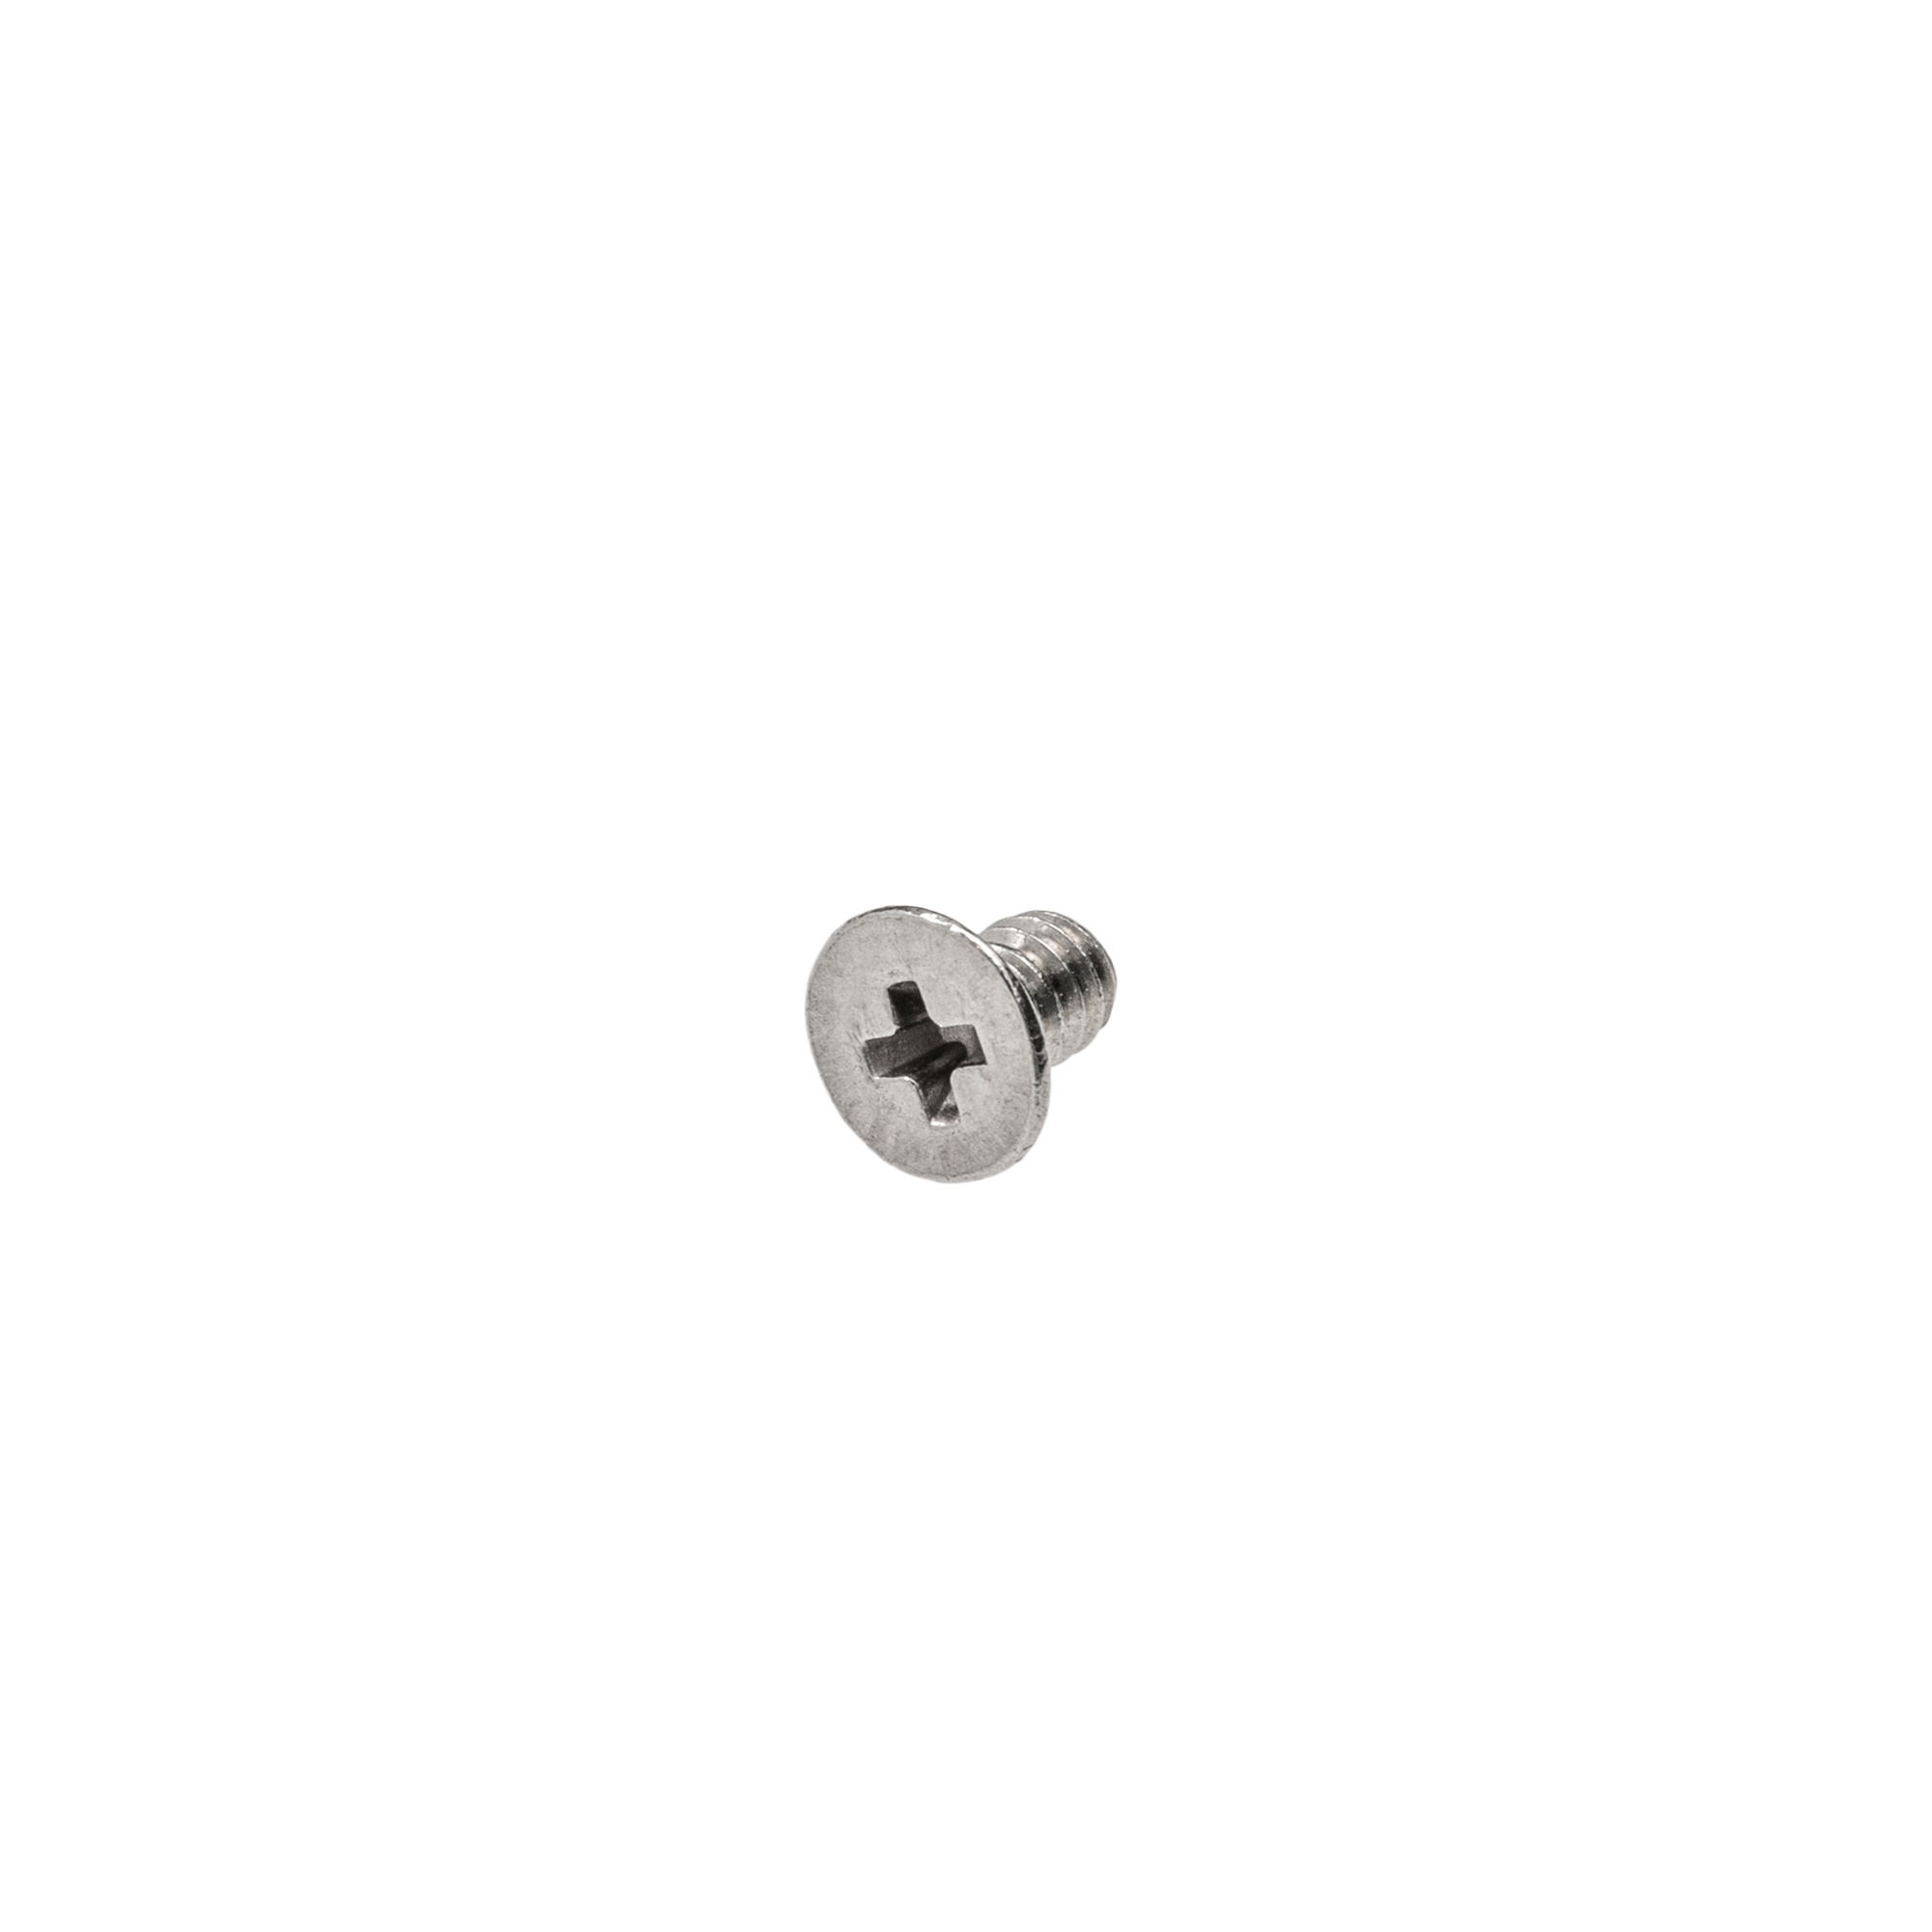 Replacement Screw for Gourmet Slicer (Item no. 12742)